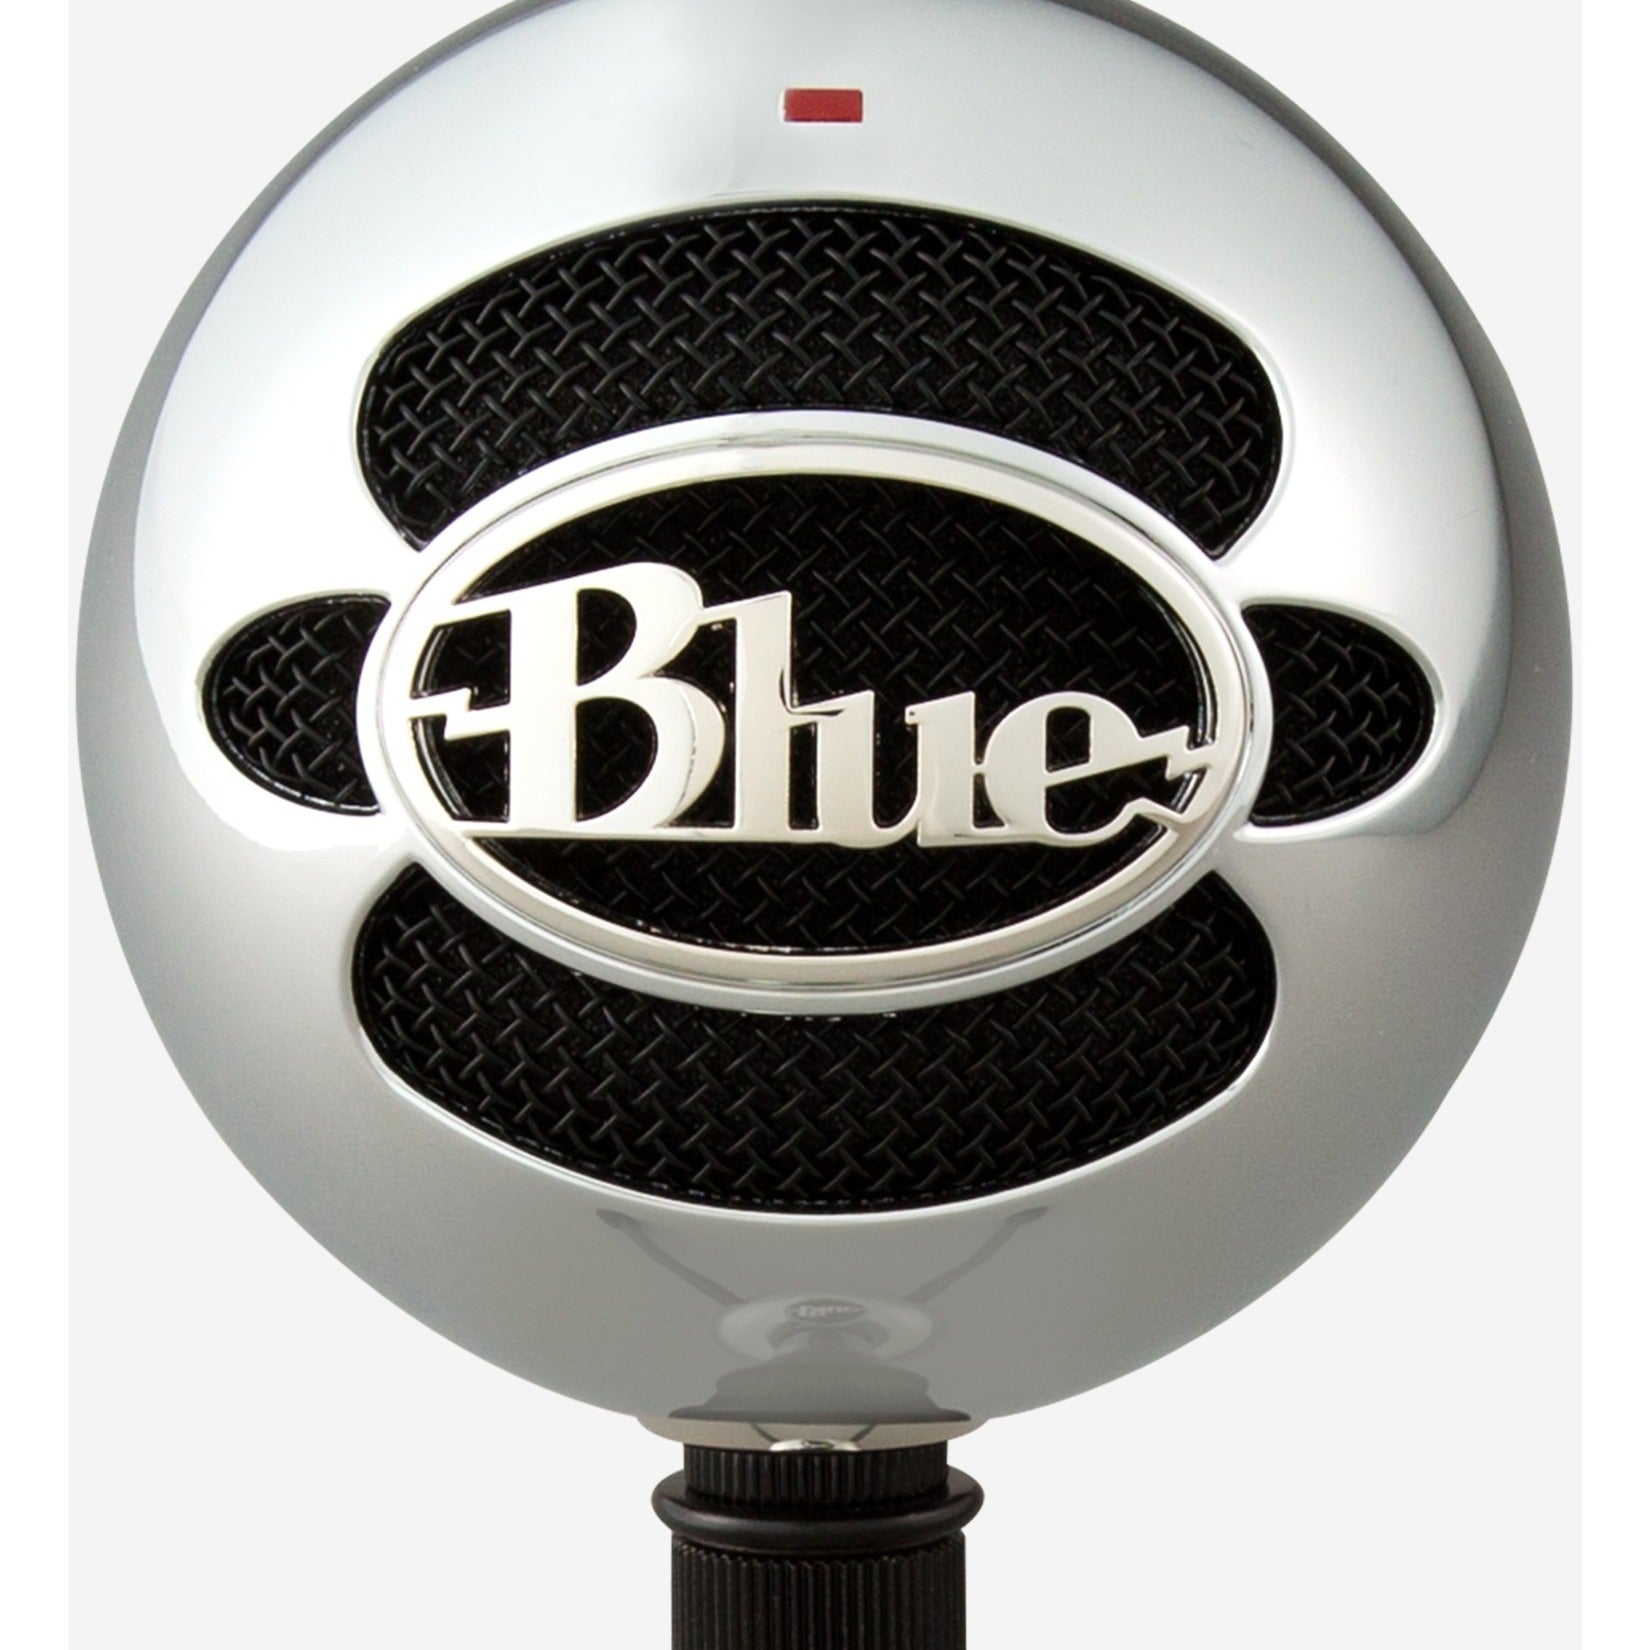 Blue 988-000068 Snowball Classic Studio-Quality USB Microphone, 2 Year Limited Warranty, Cardioid & Omni-directional Polar Pattern, Stand Mountable, Condenser Technology [Discontinued]